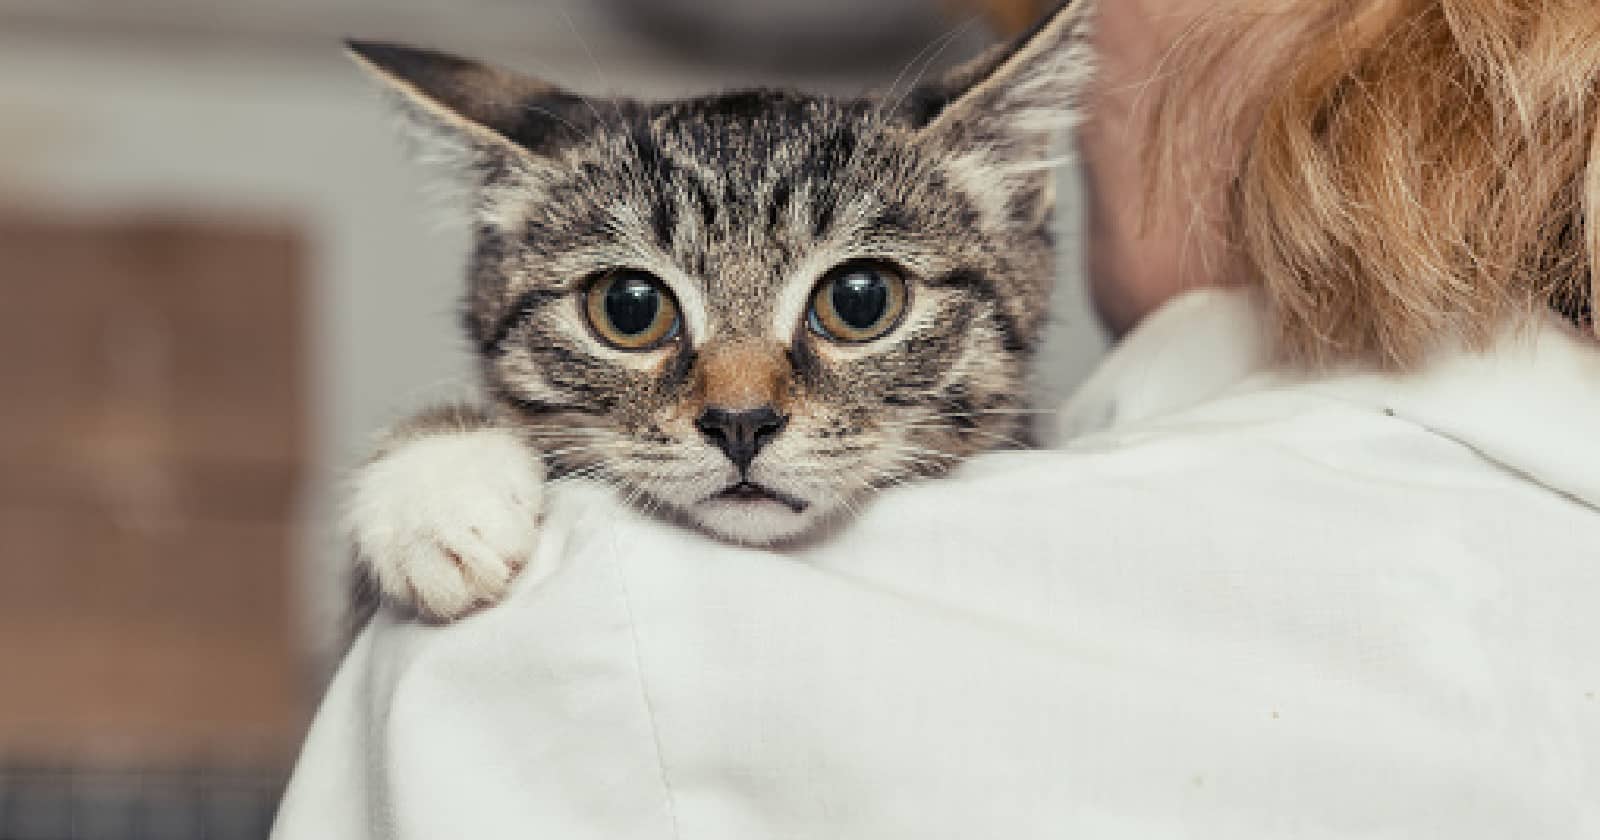 Read on to find out how to prevent separation anxiety in cats. Plus, learn how to treat it if your prevention efforts don't work out.